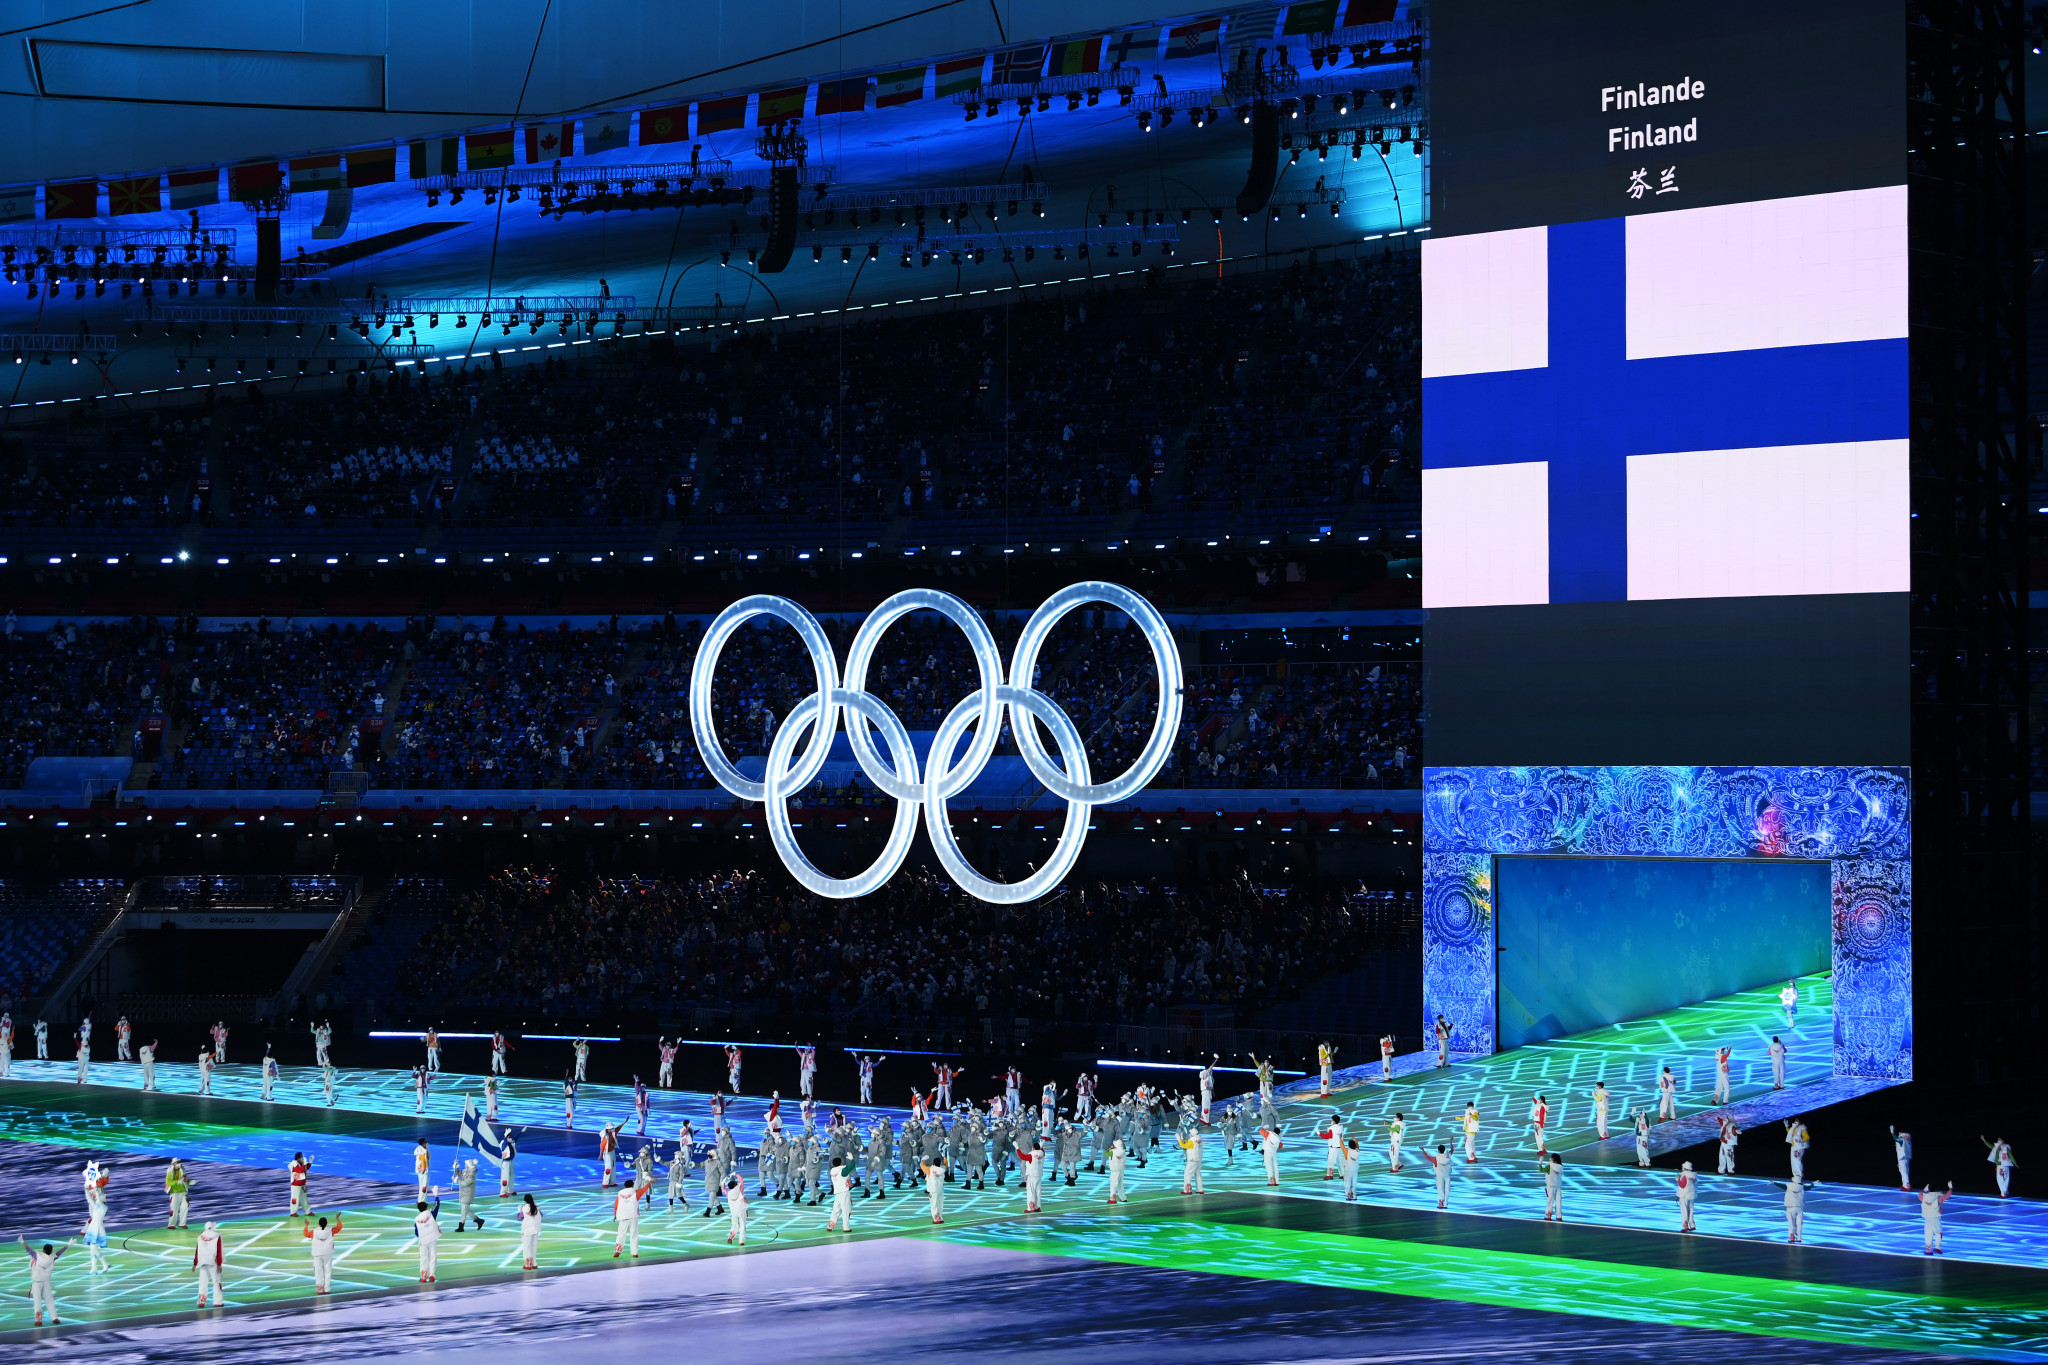 The Finnish Olympic Committee nominated 95 athletes to compete at Beijing 2022 ©Getty Images